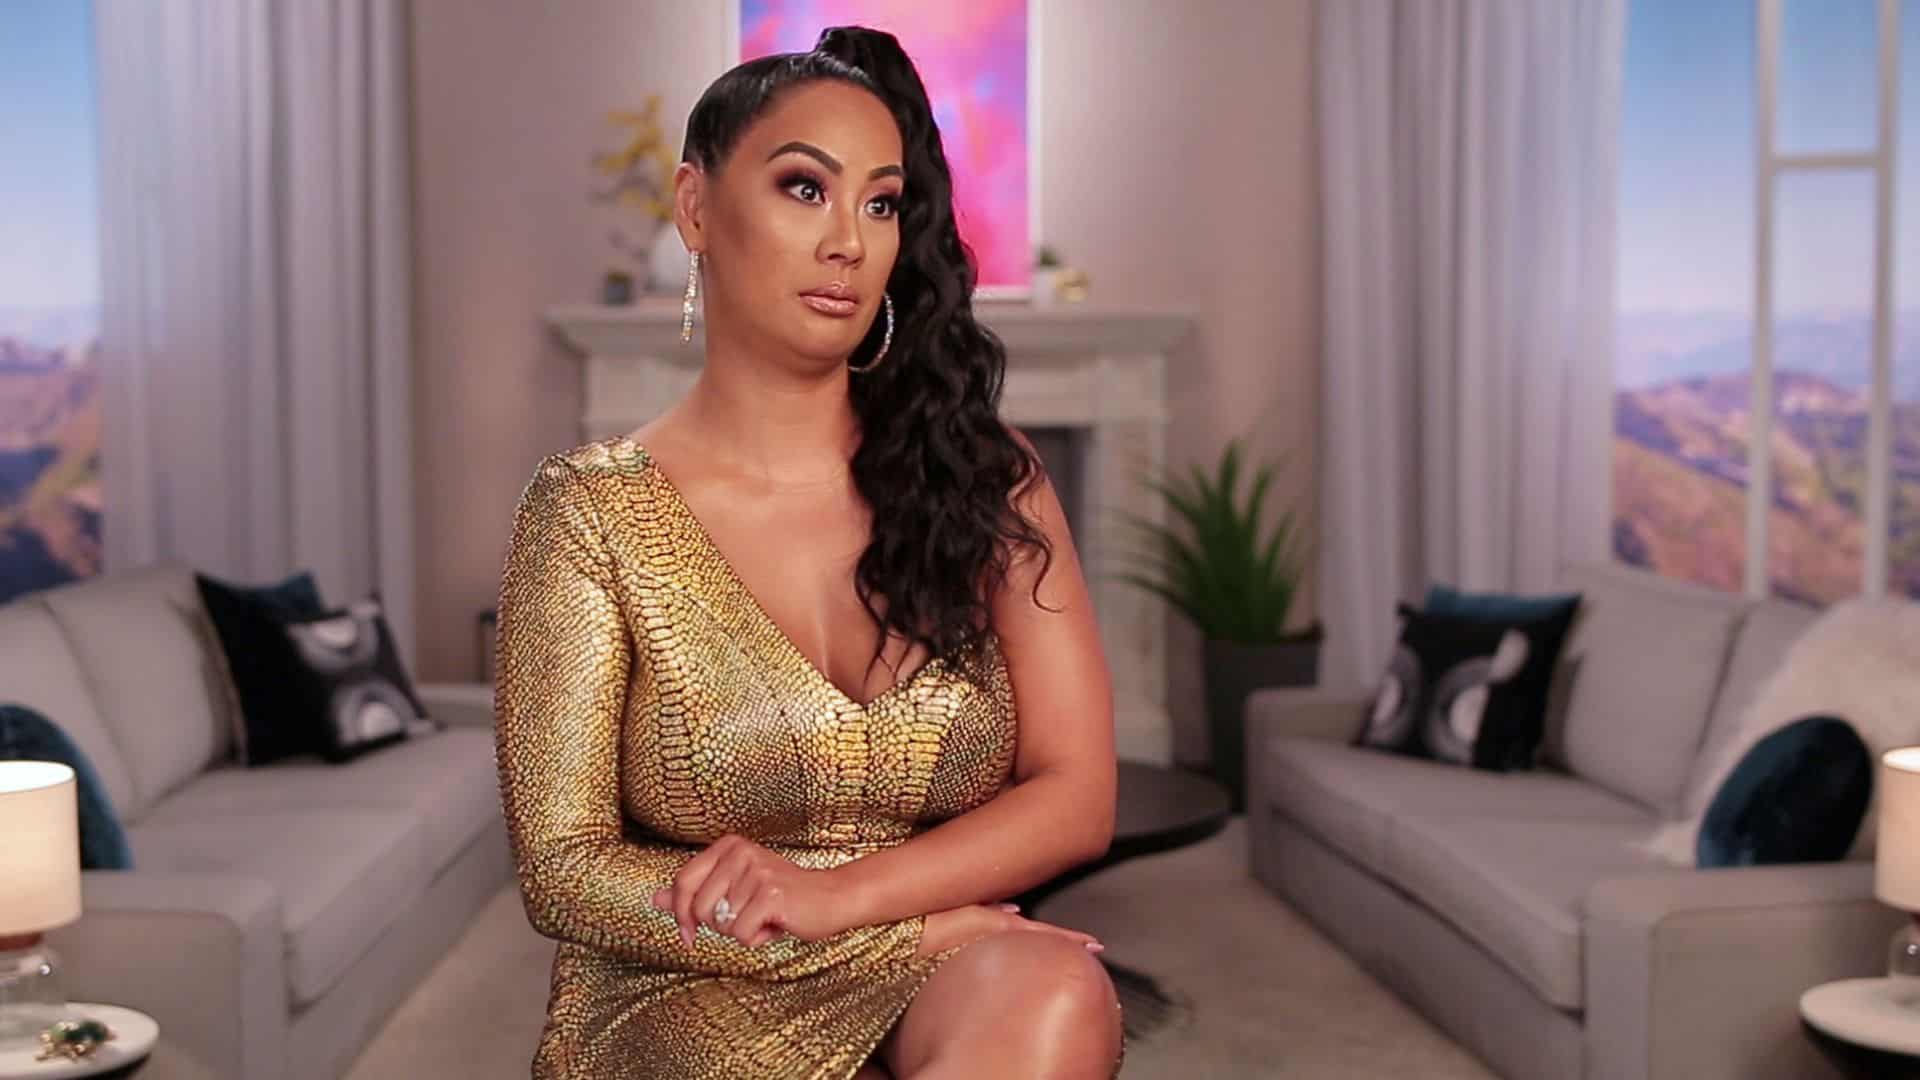 How To Watch Basketball Wives Season 11 Episodes? Streaming Guide